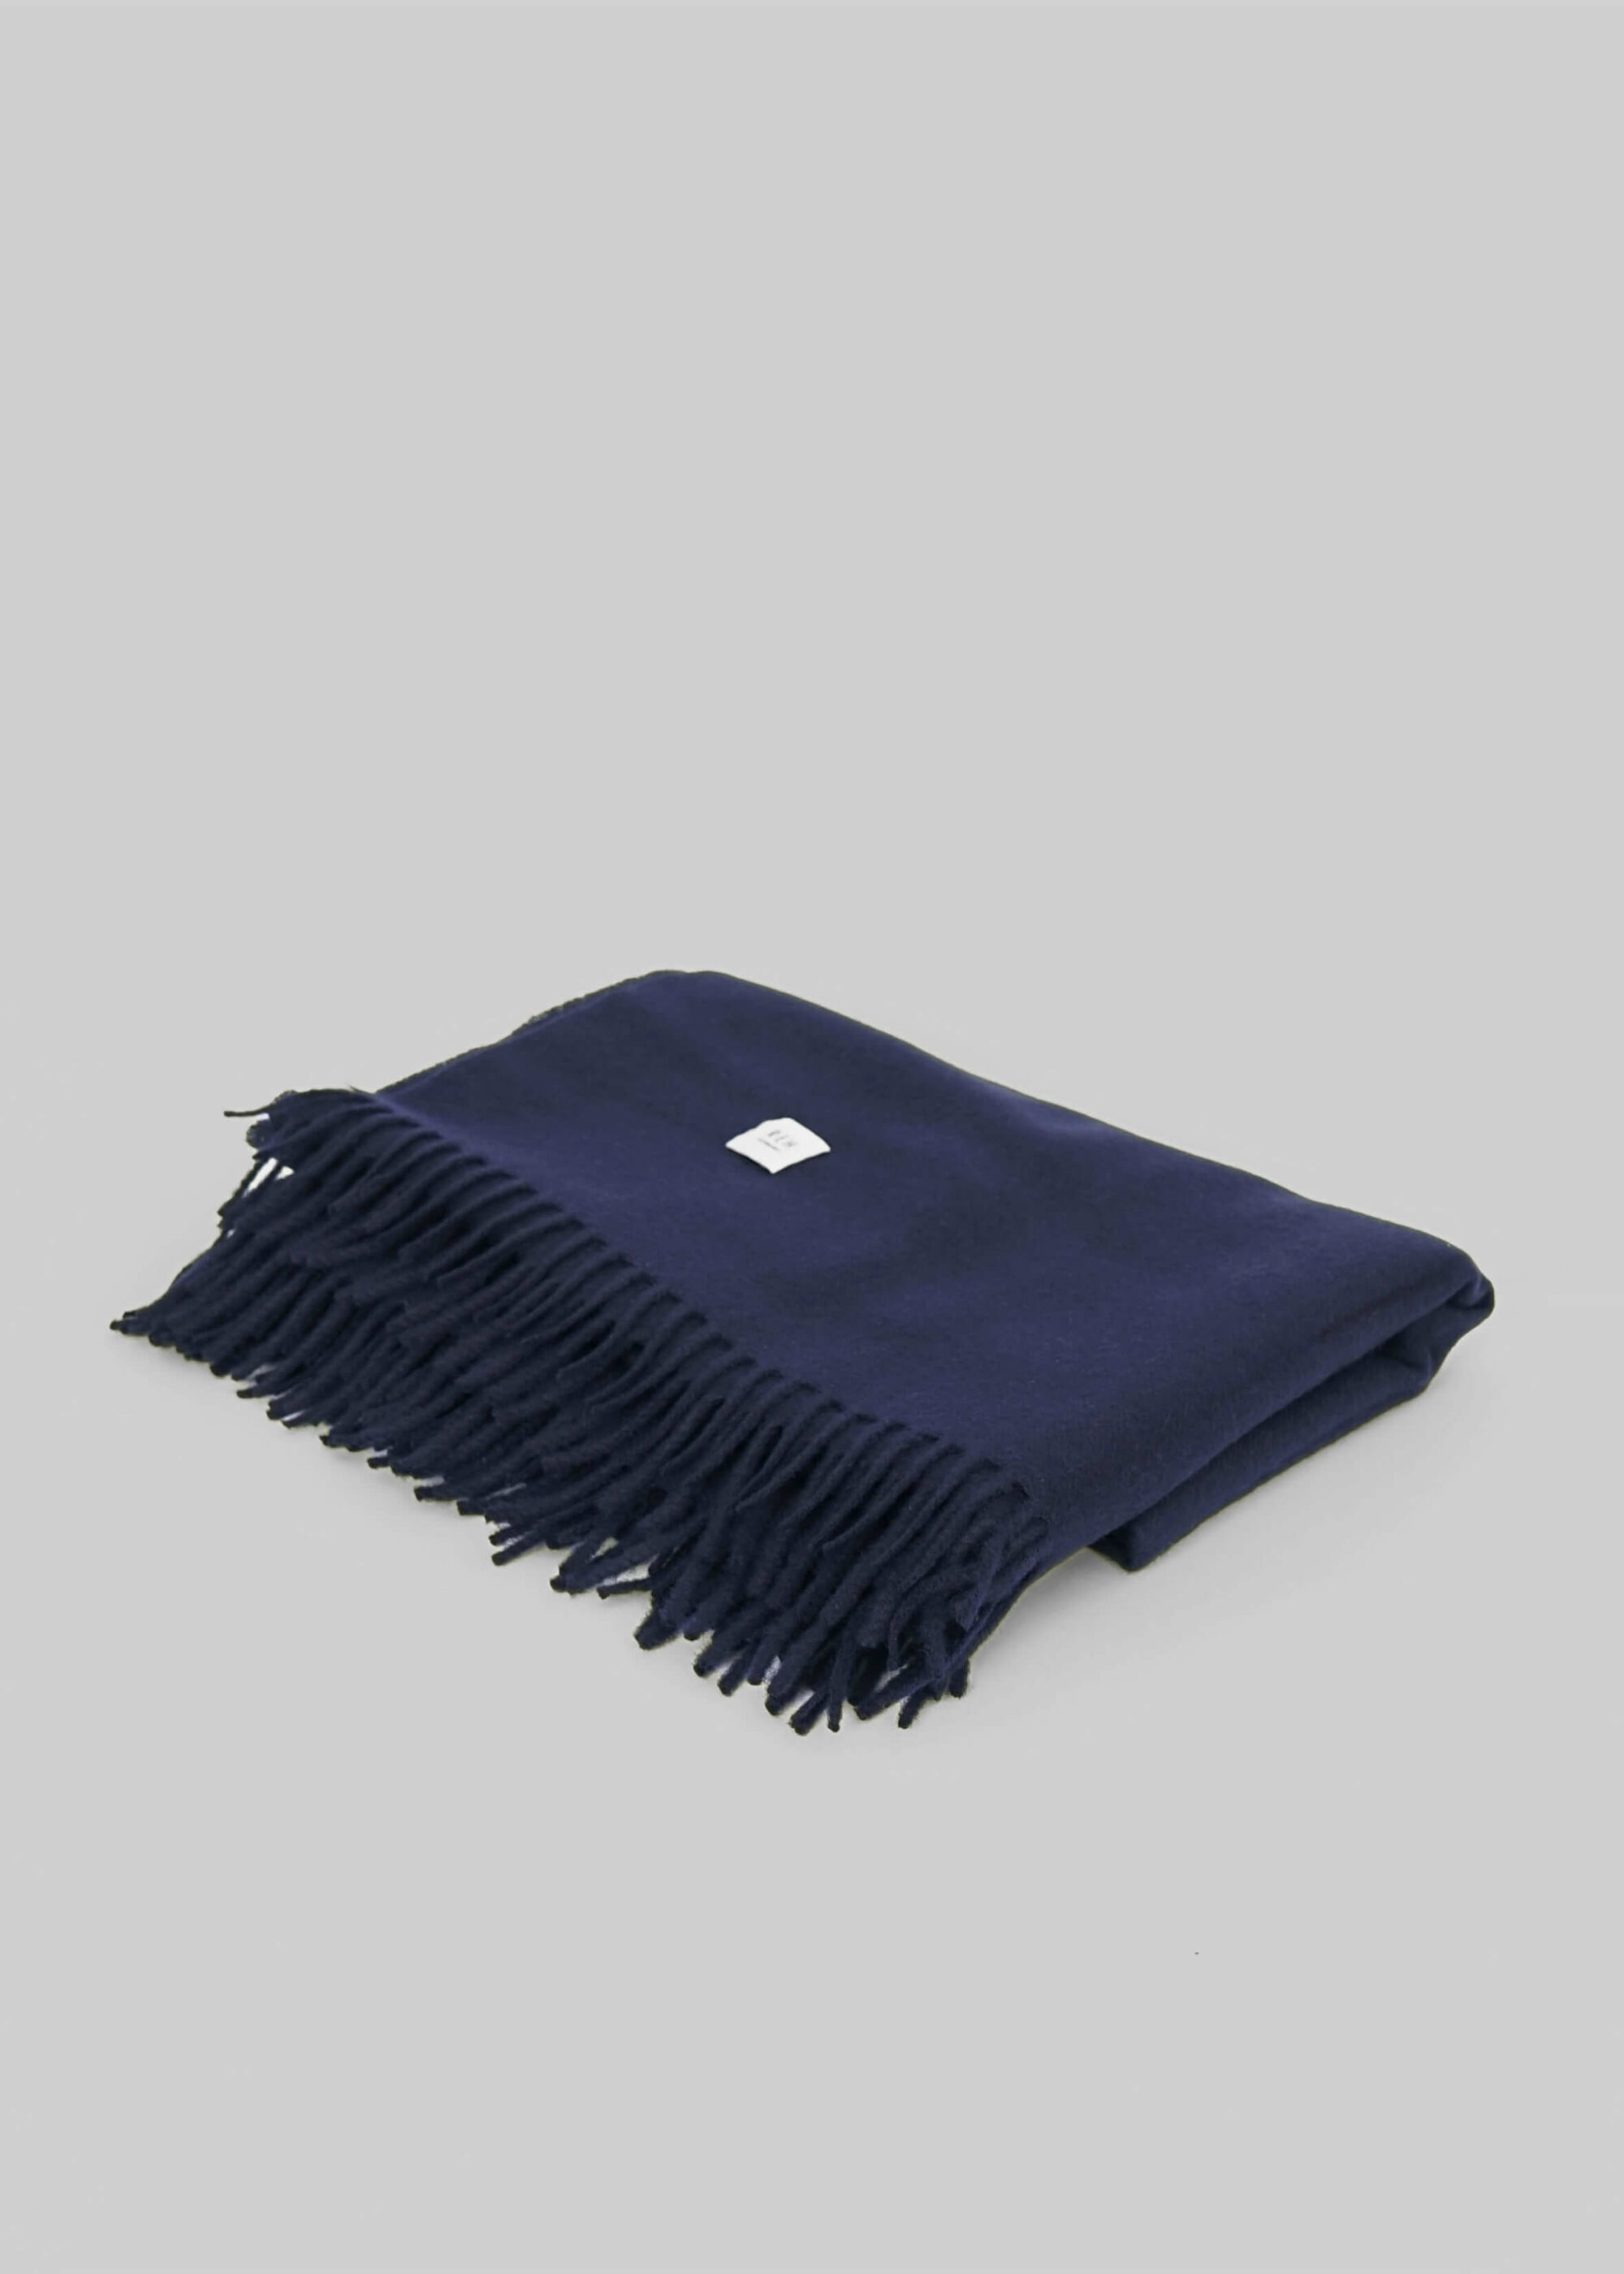 Product image for »Ea« Woven Throw Blanket | Navy